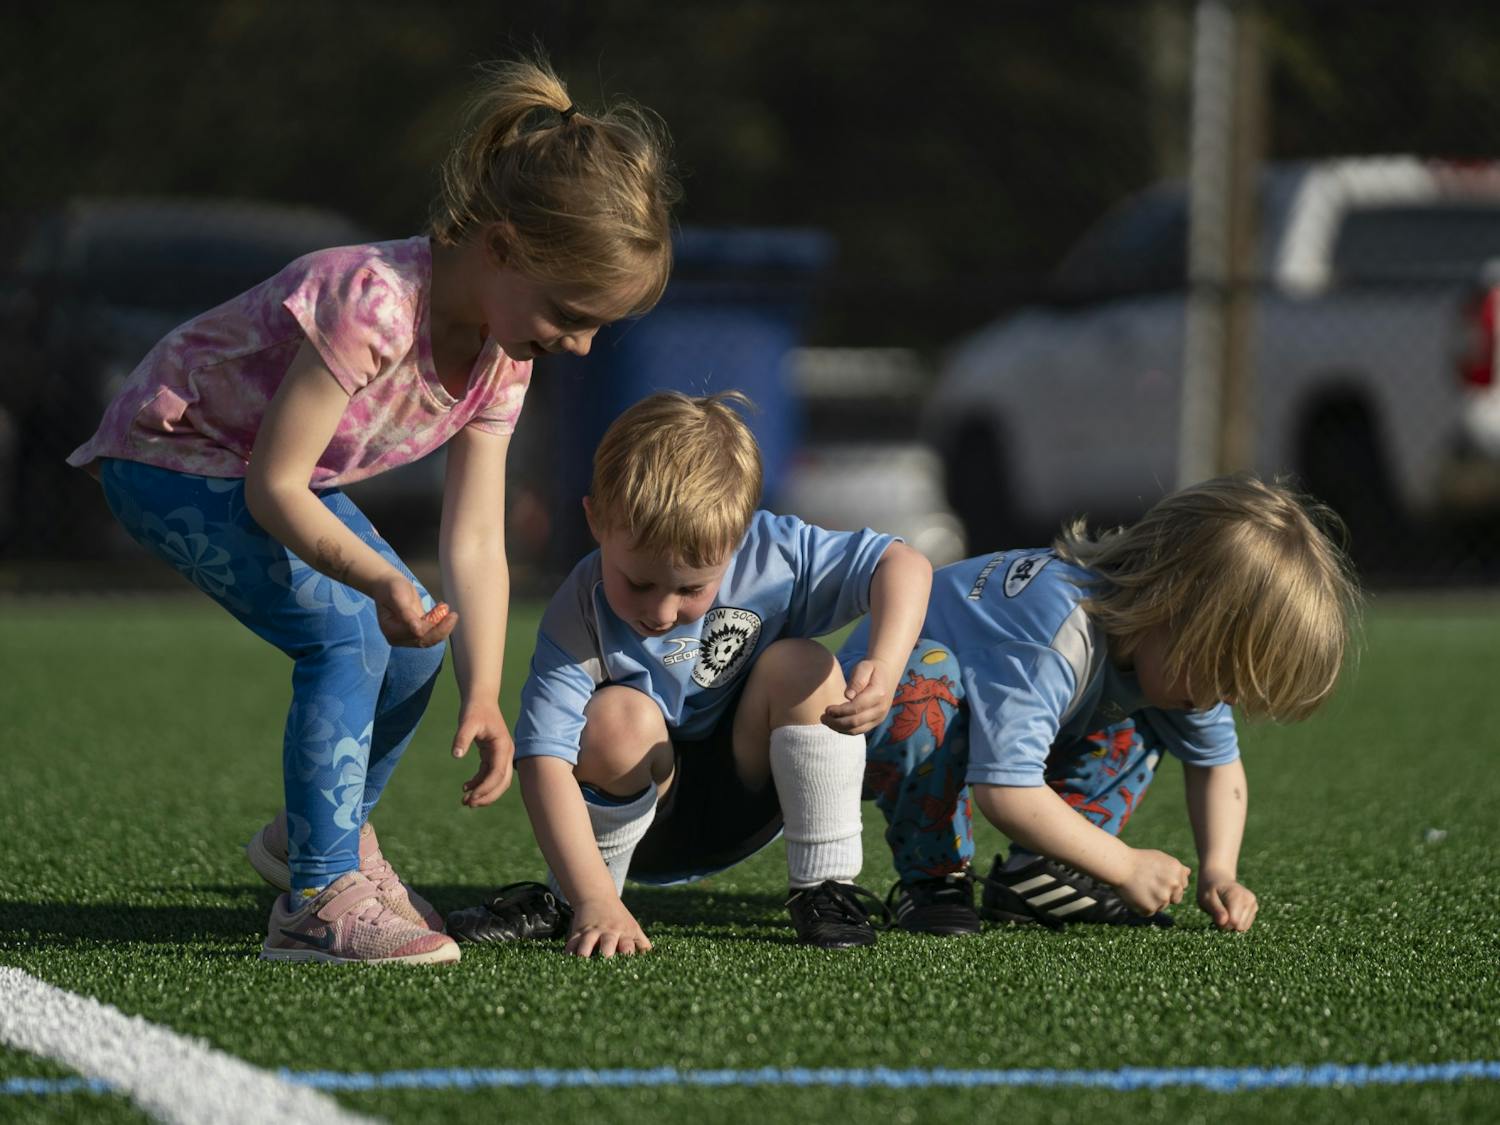 Young soccer players inspect and play with the new turf at Cedar Falls Park in Chapel Hill, N.C. on Thursday, Mar. 23, 2023. The Town of Chapel Hill held a ribbon-cutting ceremony to celebrate the freshly redone, environmentally-friendly turf for the multi-purpose field.